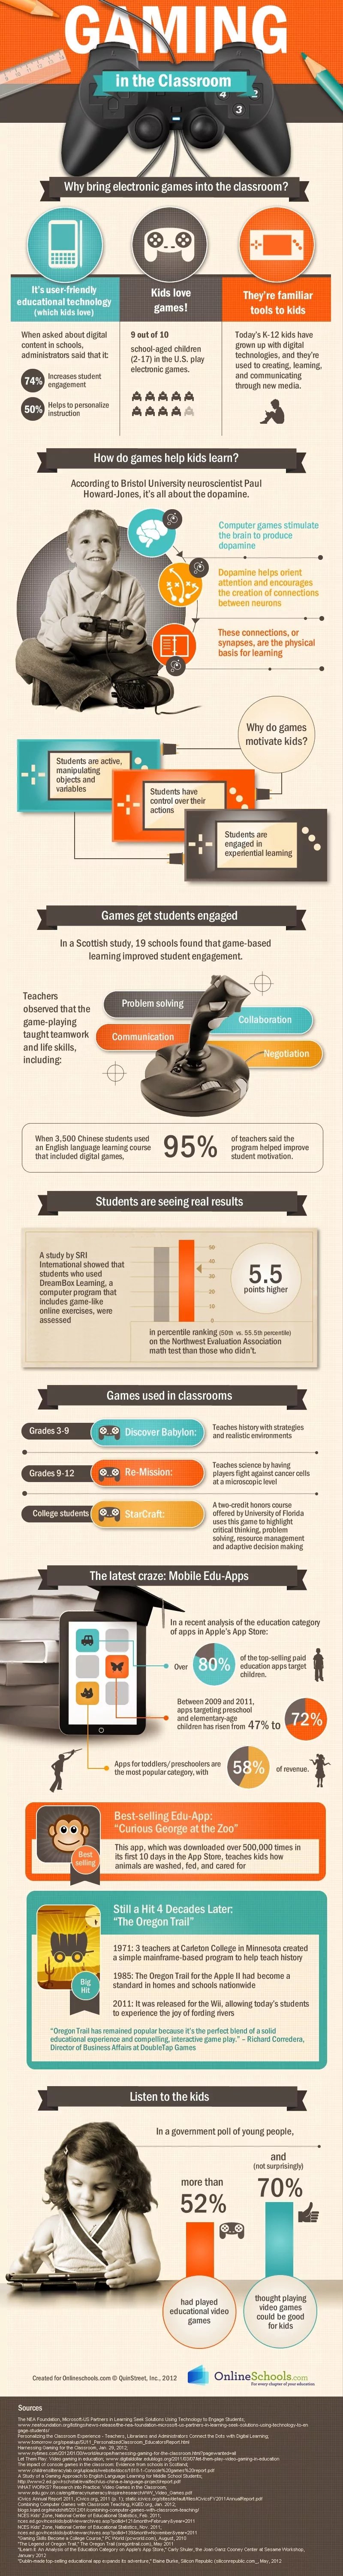 benefits of gaming in education